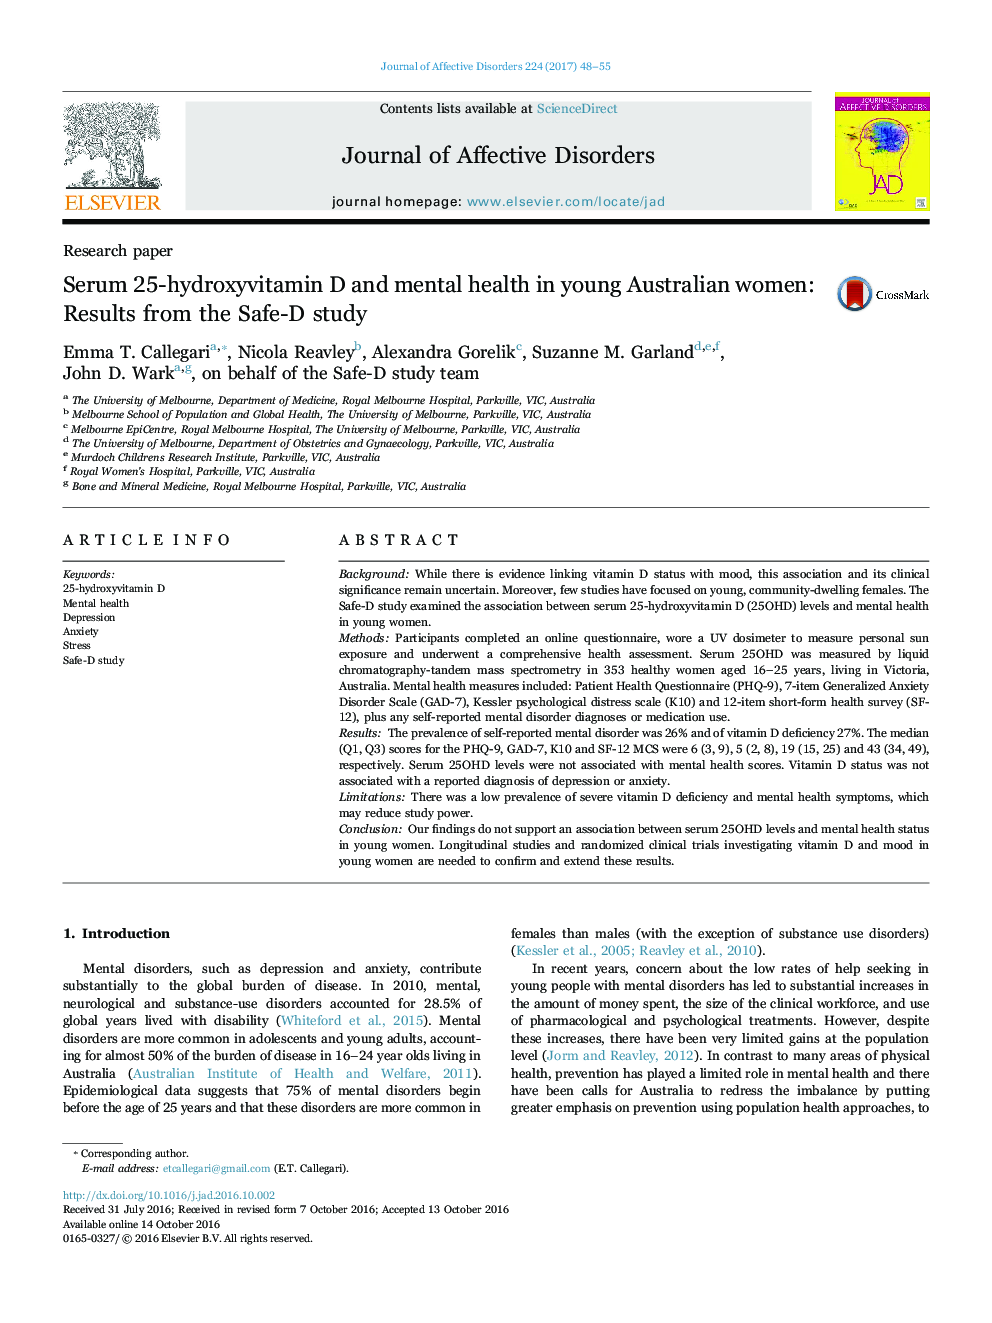 Research paperSerum 25-hydroxyvitamin D and mental health in young Australian women: Results from the Safe-D study